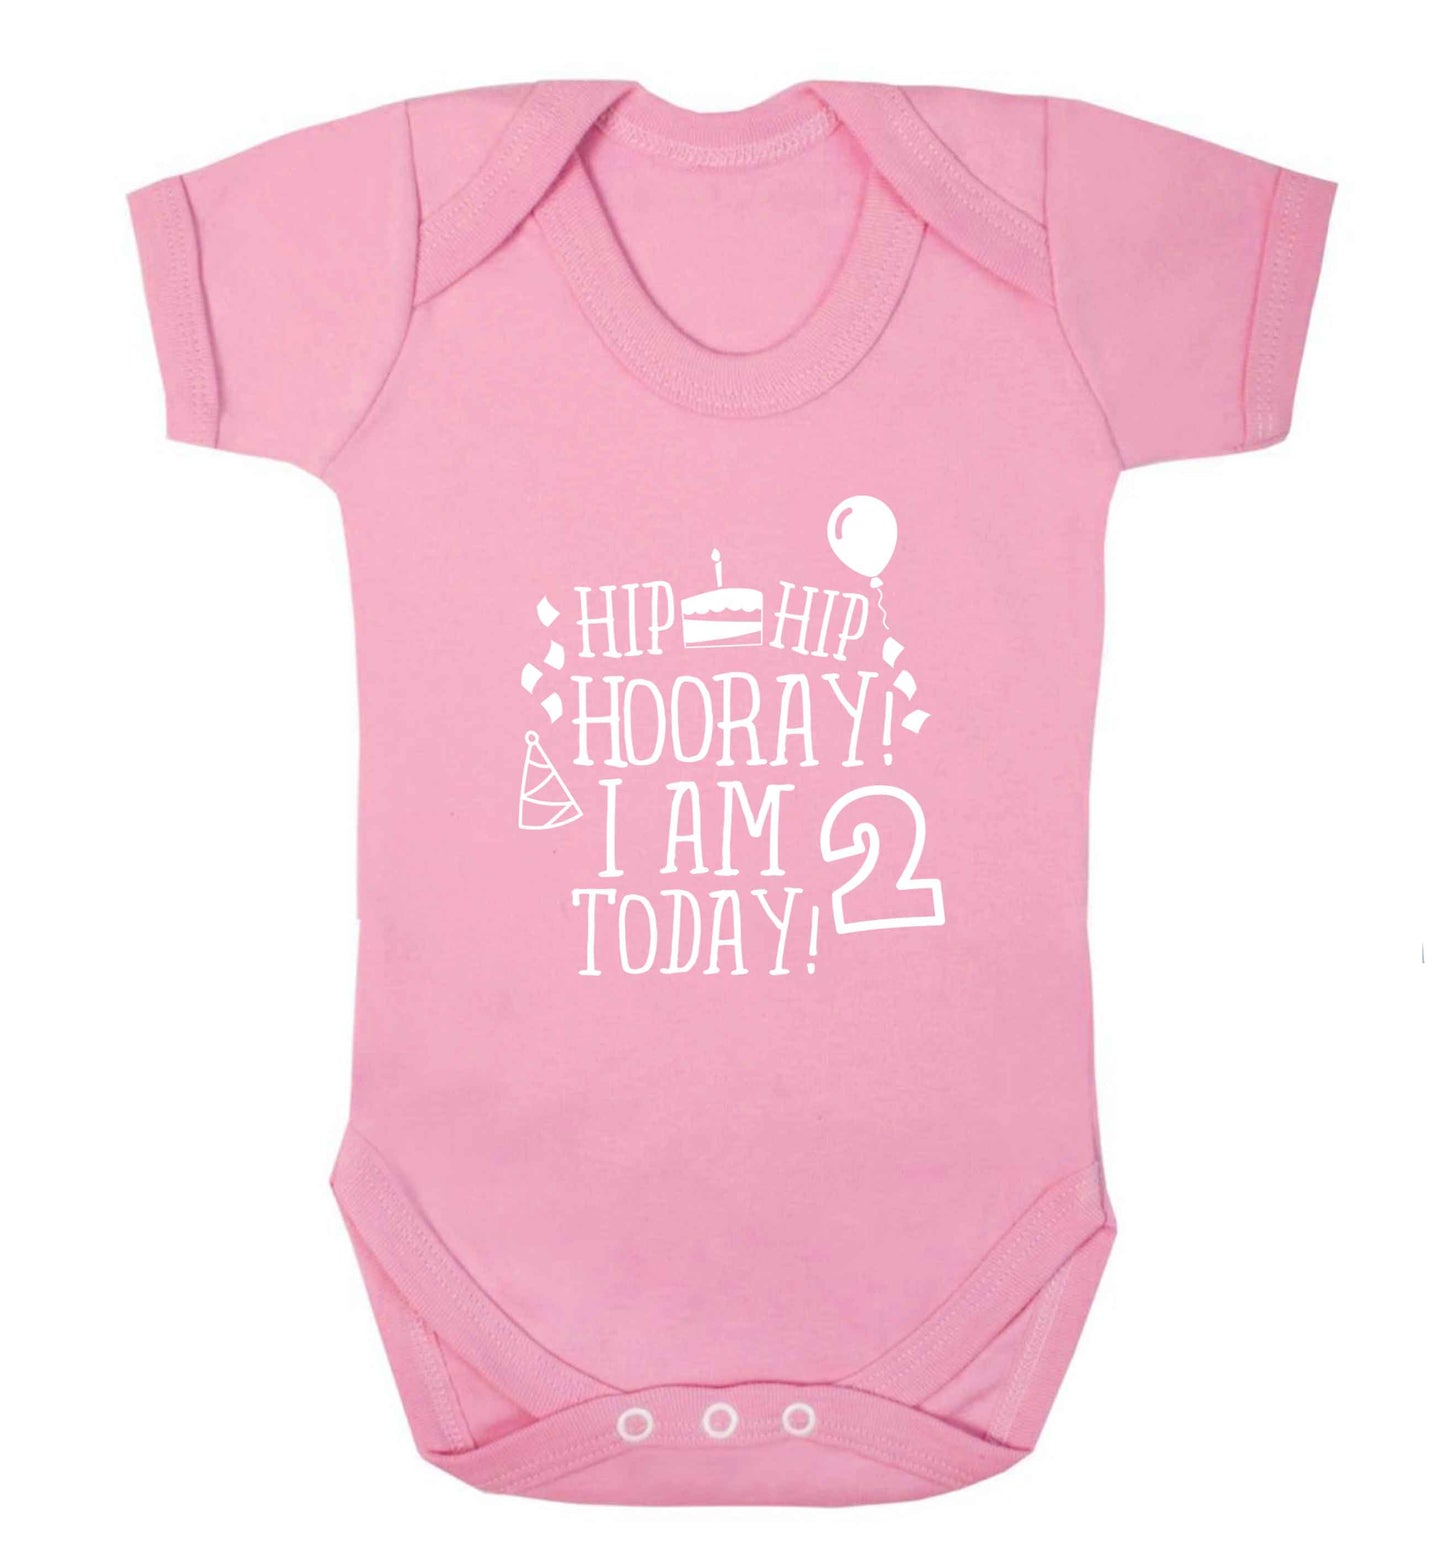 I'm 2 Today baby vest pale pink 18-24 months